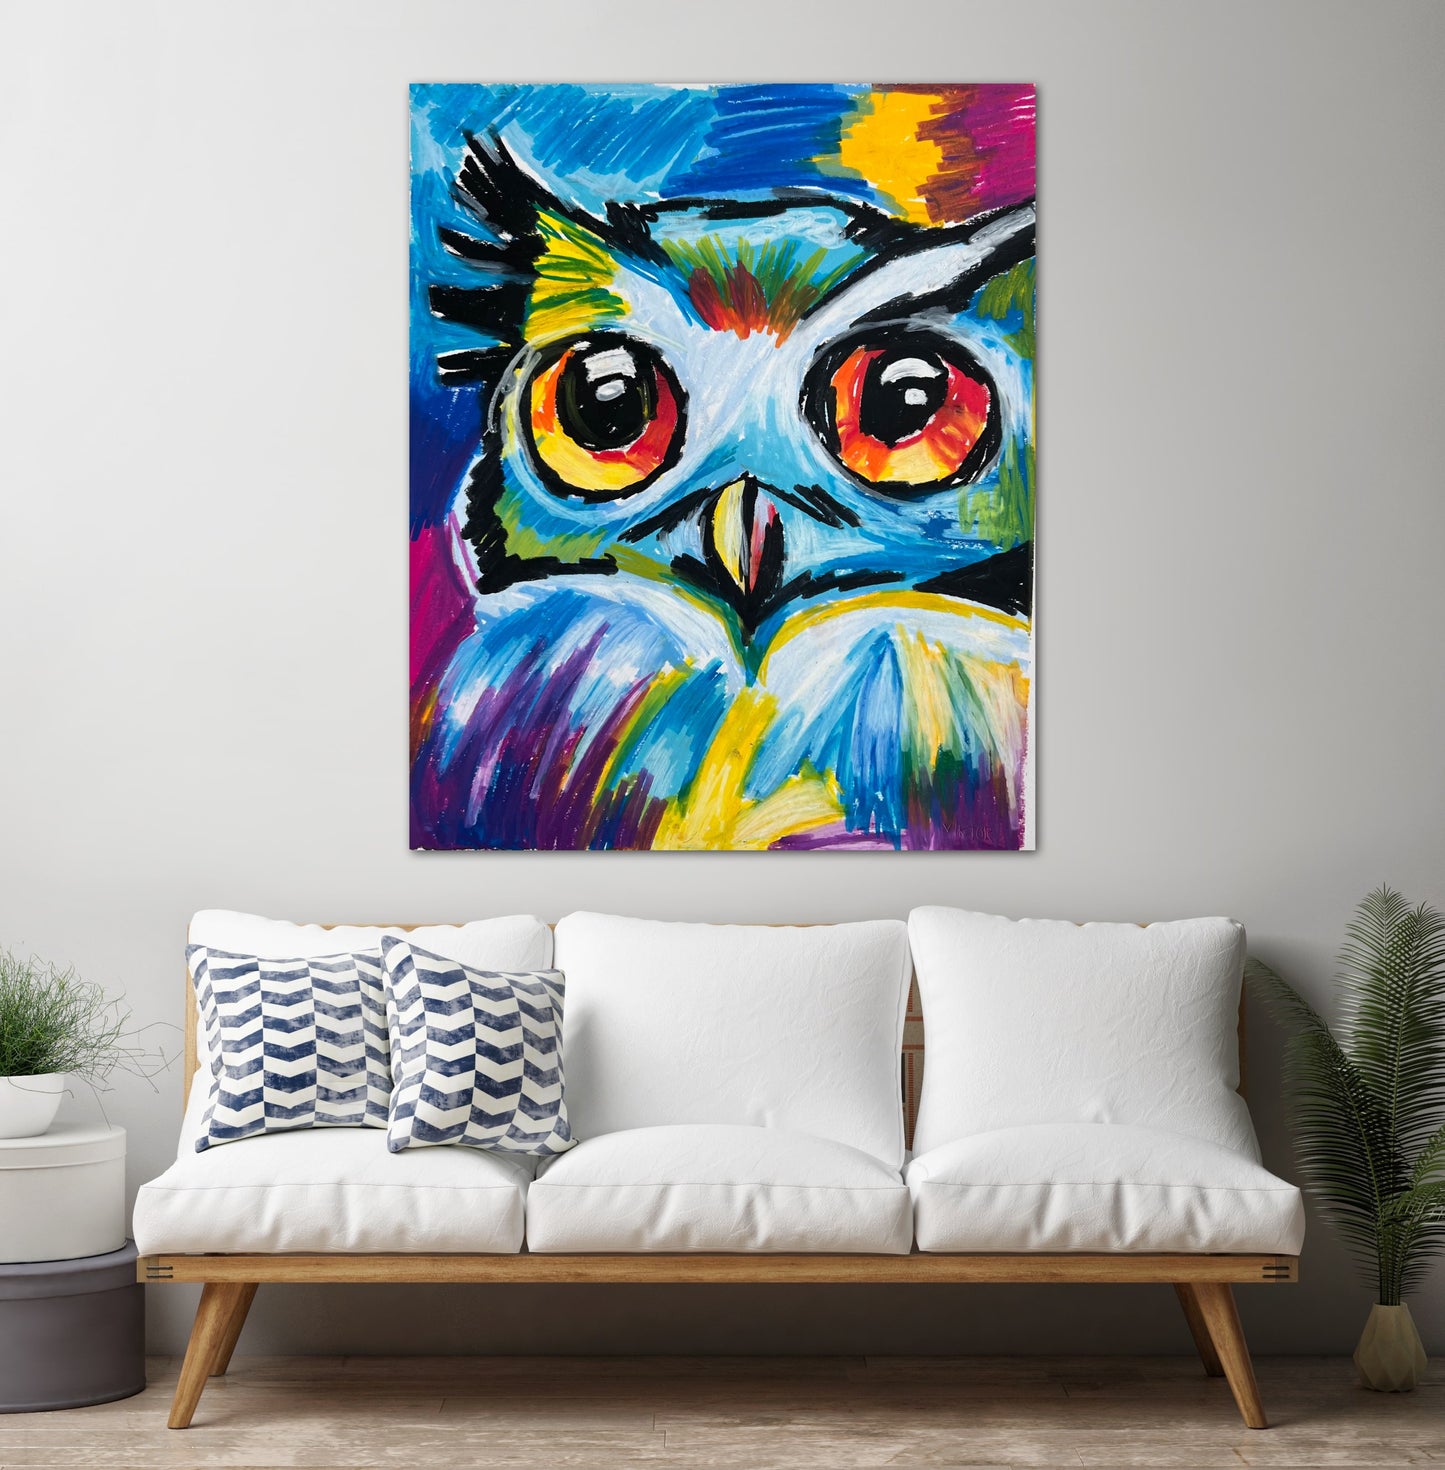 Amazing Owl - fine prints and canvas prints in more sizes